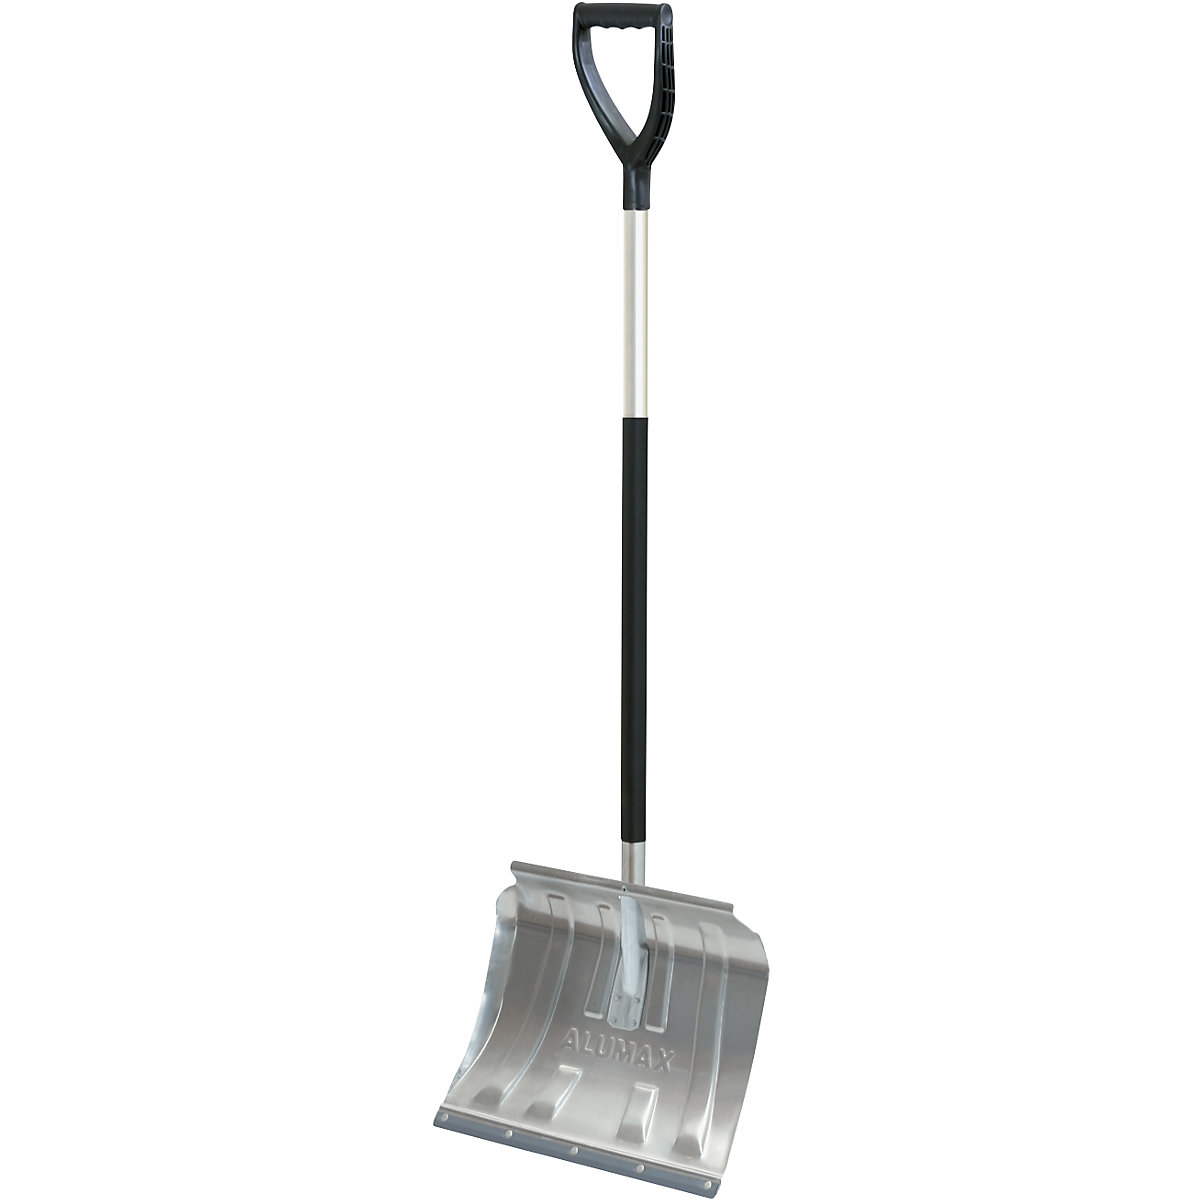 Snow shovel, LxWxH 1505 x 500 x 375 mm, with rubber edge, silver